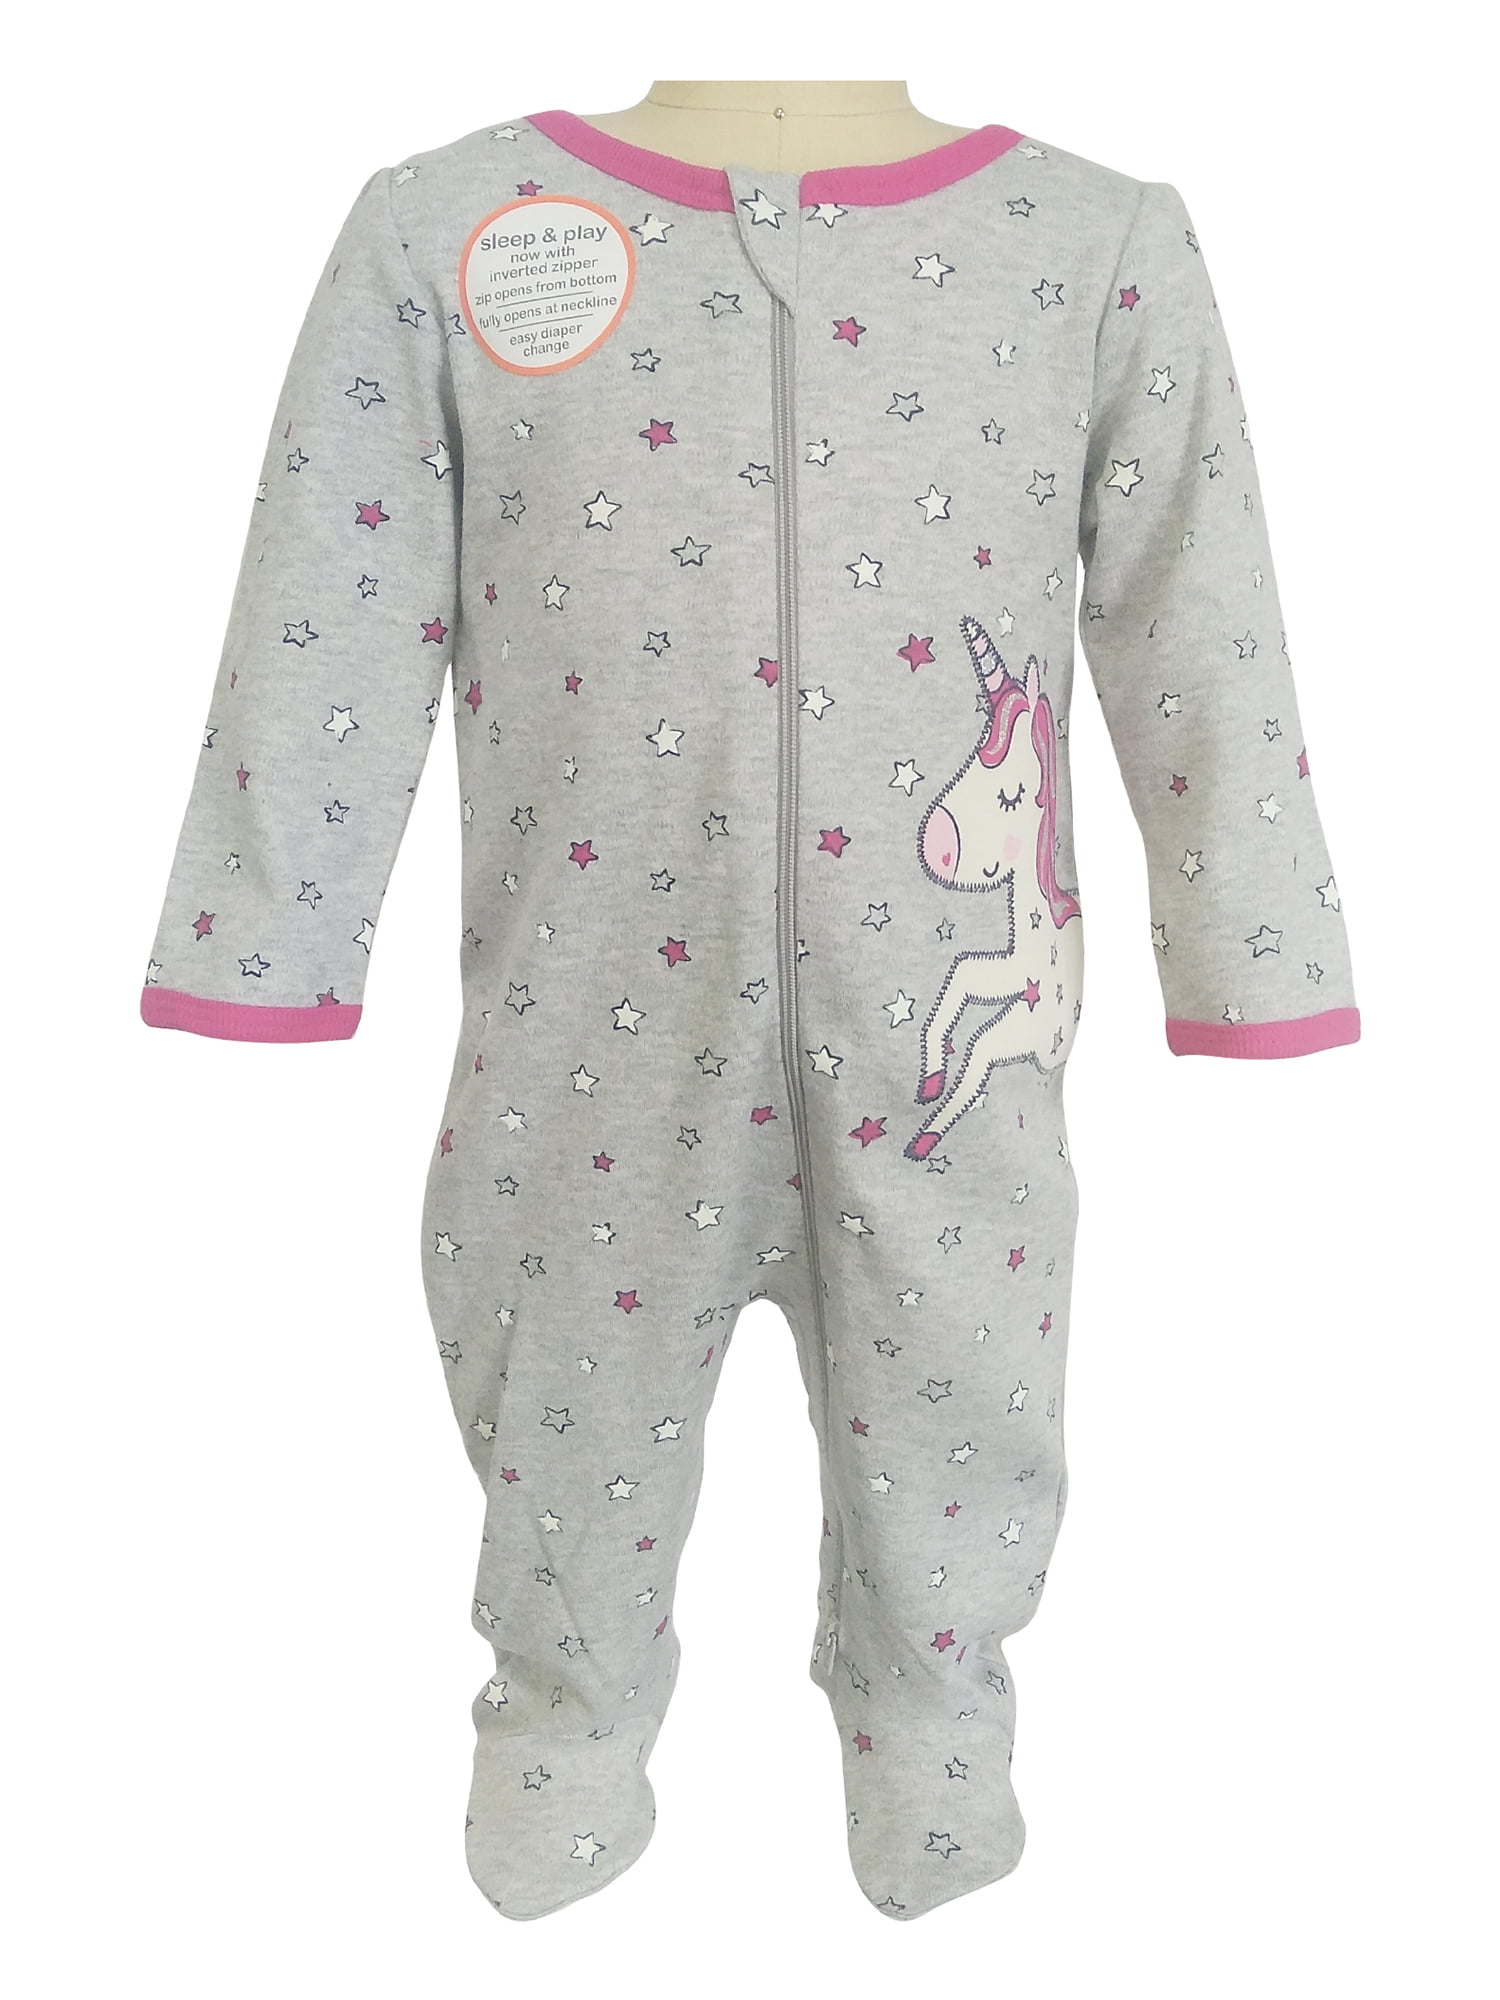 Carter's Baby Terry Gray/Pink/White Mouse Sleep & Play One-Piece New 9 Months 